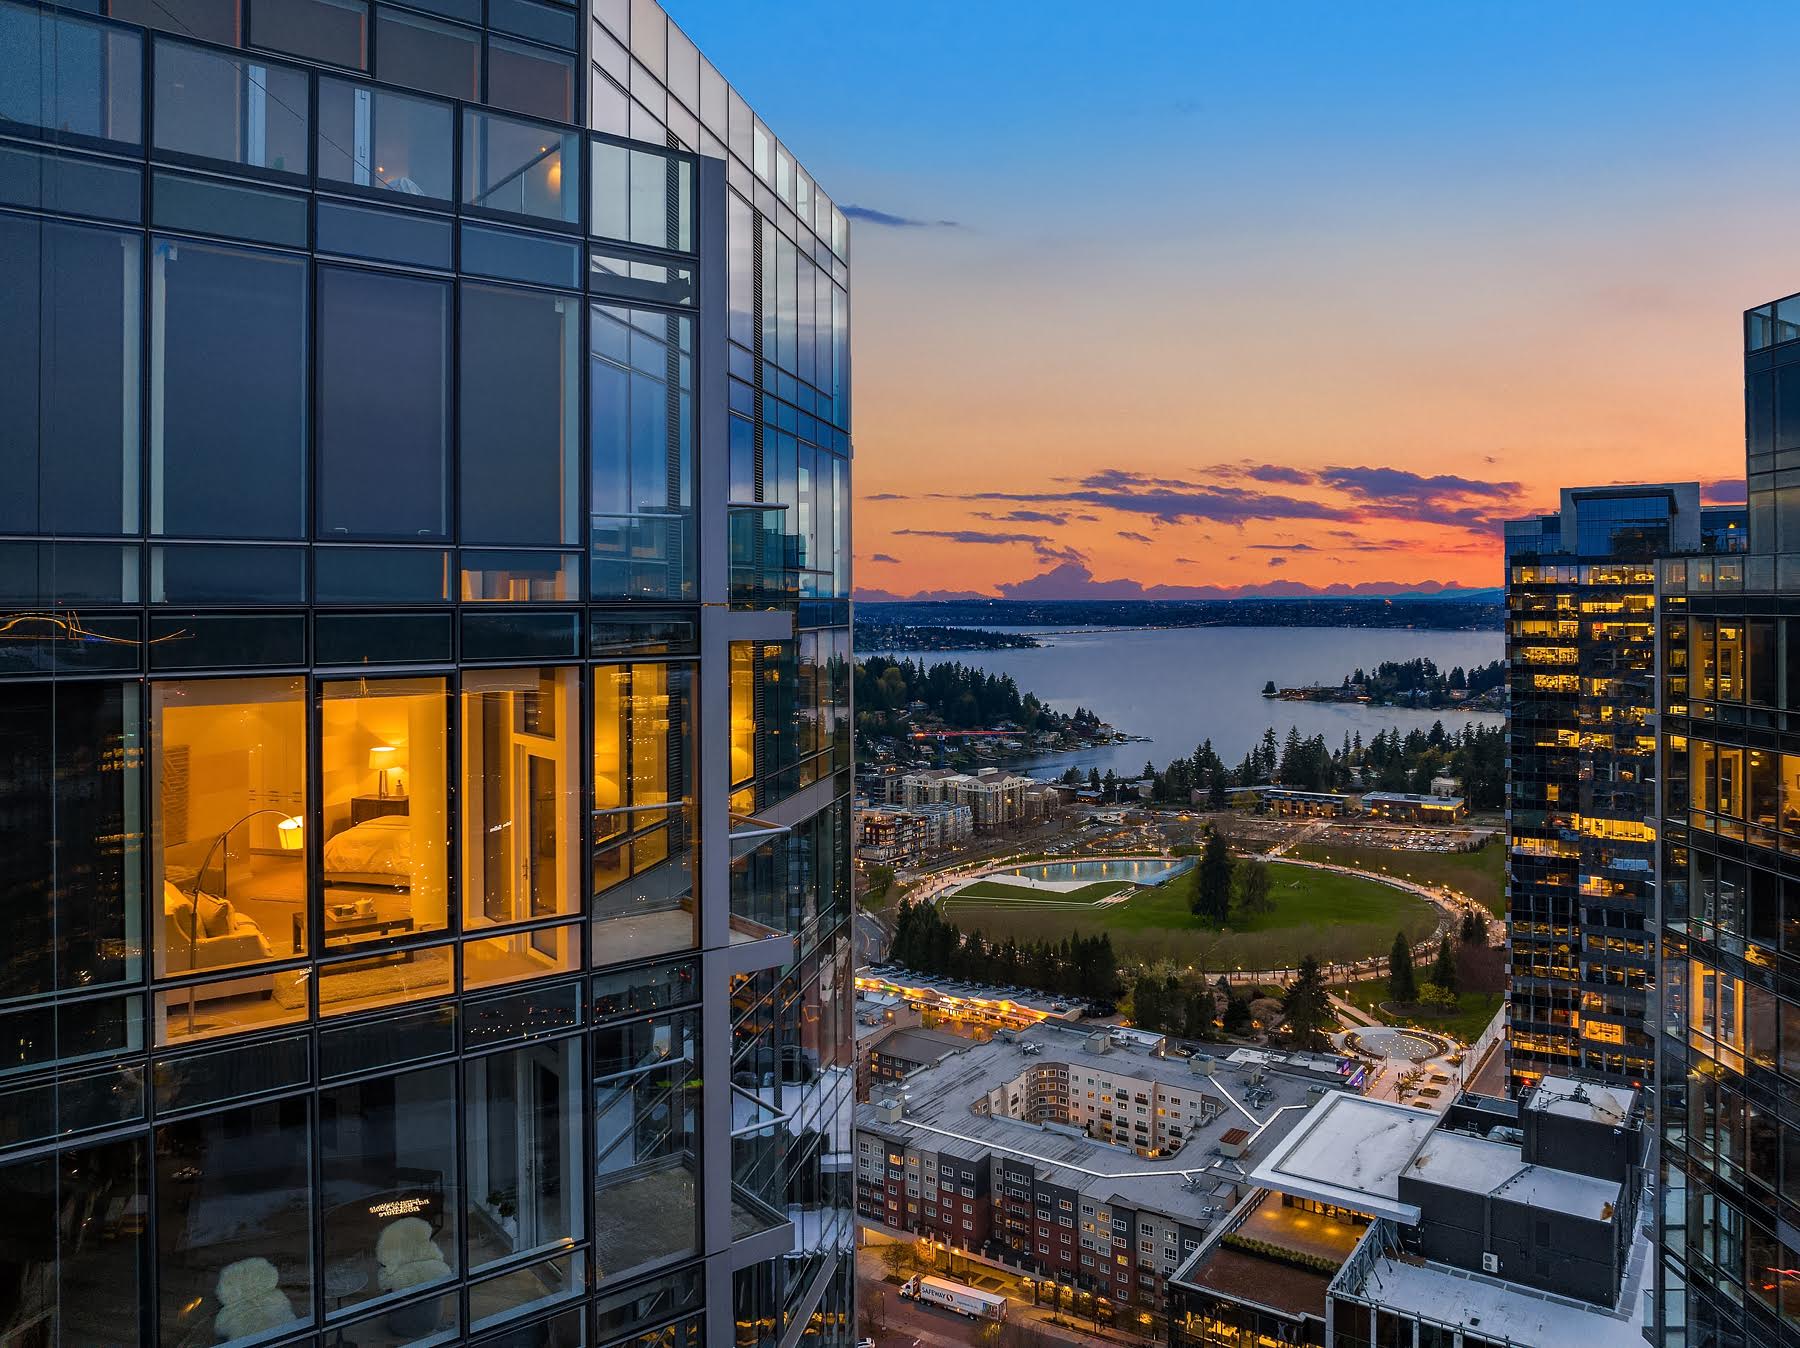 Condo Real Estate Expert Discusses Rising Interest Rates, Condo Projects in Bellevue